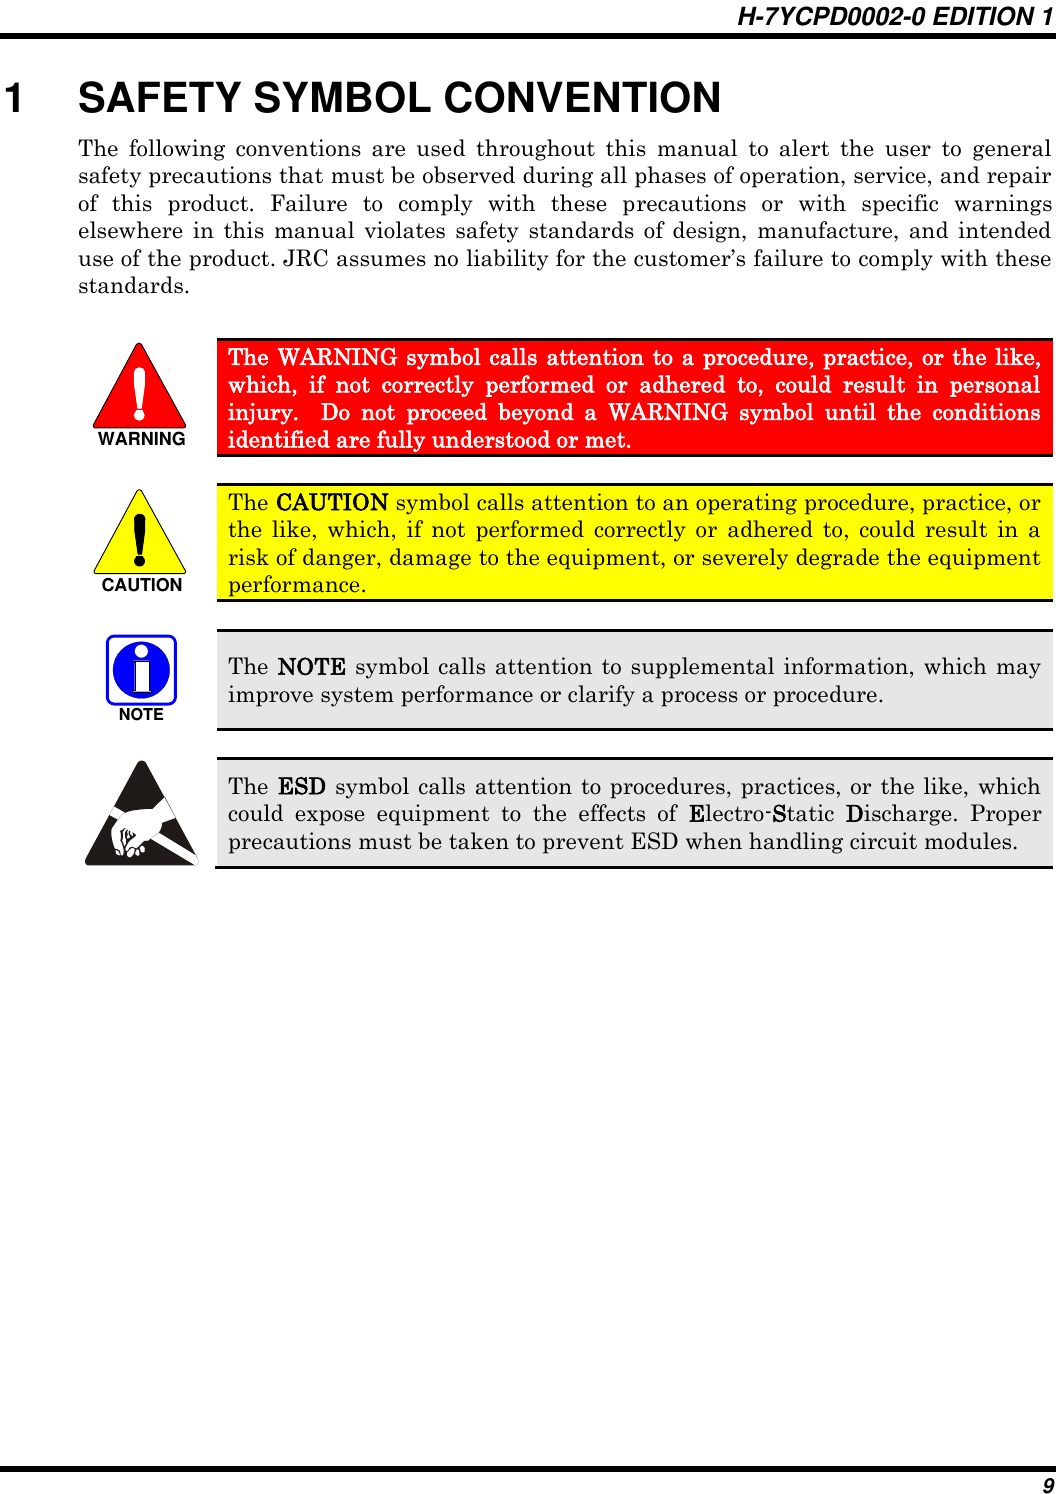 H-7YCPD0002-0 EDITION 1 9 1  SAFETY SYMBOL CONVENTION The  following  conventions  are  used  throughout  this  manual  to  alert  the  user  to  general safety precautions that must be observed during all phases of operation, service, and repair of  this  product.  Failure  to  comply  with  these  precautions  or  with  specific  warnings elsewhere  in this manual  violates safety  standards of design,  manufacture,  and  intended use of the product. JRC assumes no liability for the customer‟s failure to comply with these standards.  WARNING The WARNING symbol calls attention to a procedure, practice, or the like, which,  if  not  correctly  performed  or  adhered  to,  could  result  in  personal injury.    Do  not  proceed  beyond  a  WARNING  symbol  until  the  conditions identified are fully understood or met.    CAUTION The CAUTION symbol calls attention to an operating procedure, practice, or the  like,  which,  if  not  performed  correctly  or  adhered  to,  could  result  in  a risk of danger, damage to the equipment, or severely degrade the equipment performance.   NOTE The NOTE symbol calls attention to supplemental information, which may improve system performance or clarify a process or procedure.    The ESD symbol calls attention to procedures, practices, or the like, which could  expose  equipment  to  the  effects  of  Electro-Static  Discharge.  Proper precautions must be taken to prevent ESD when handling circuit modules.  